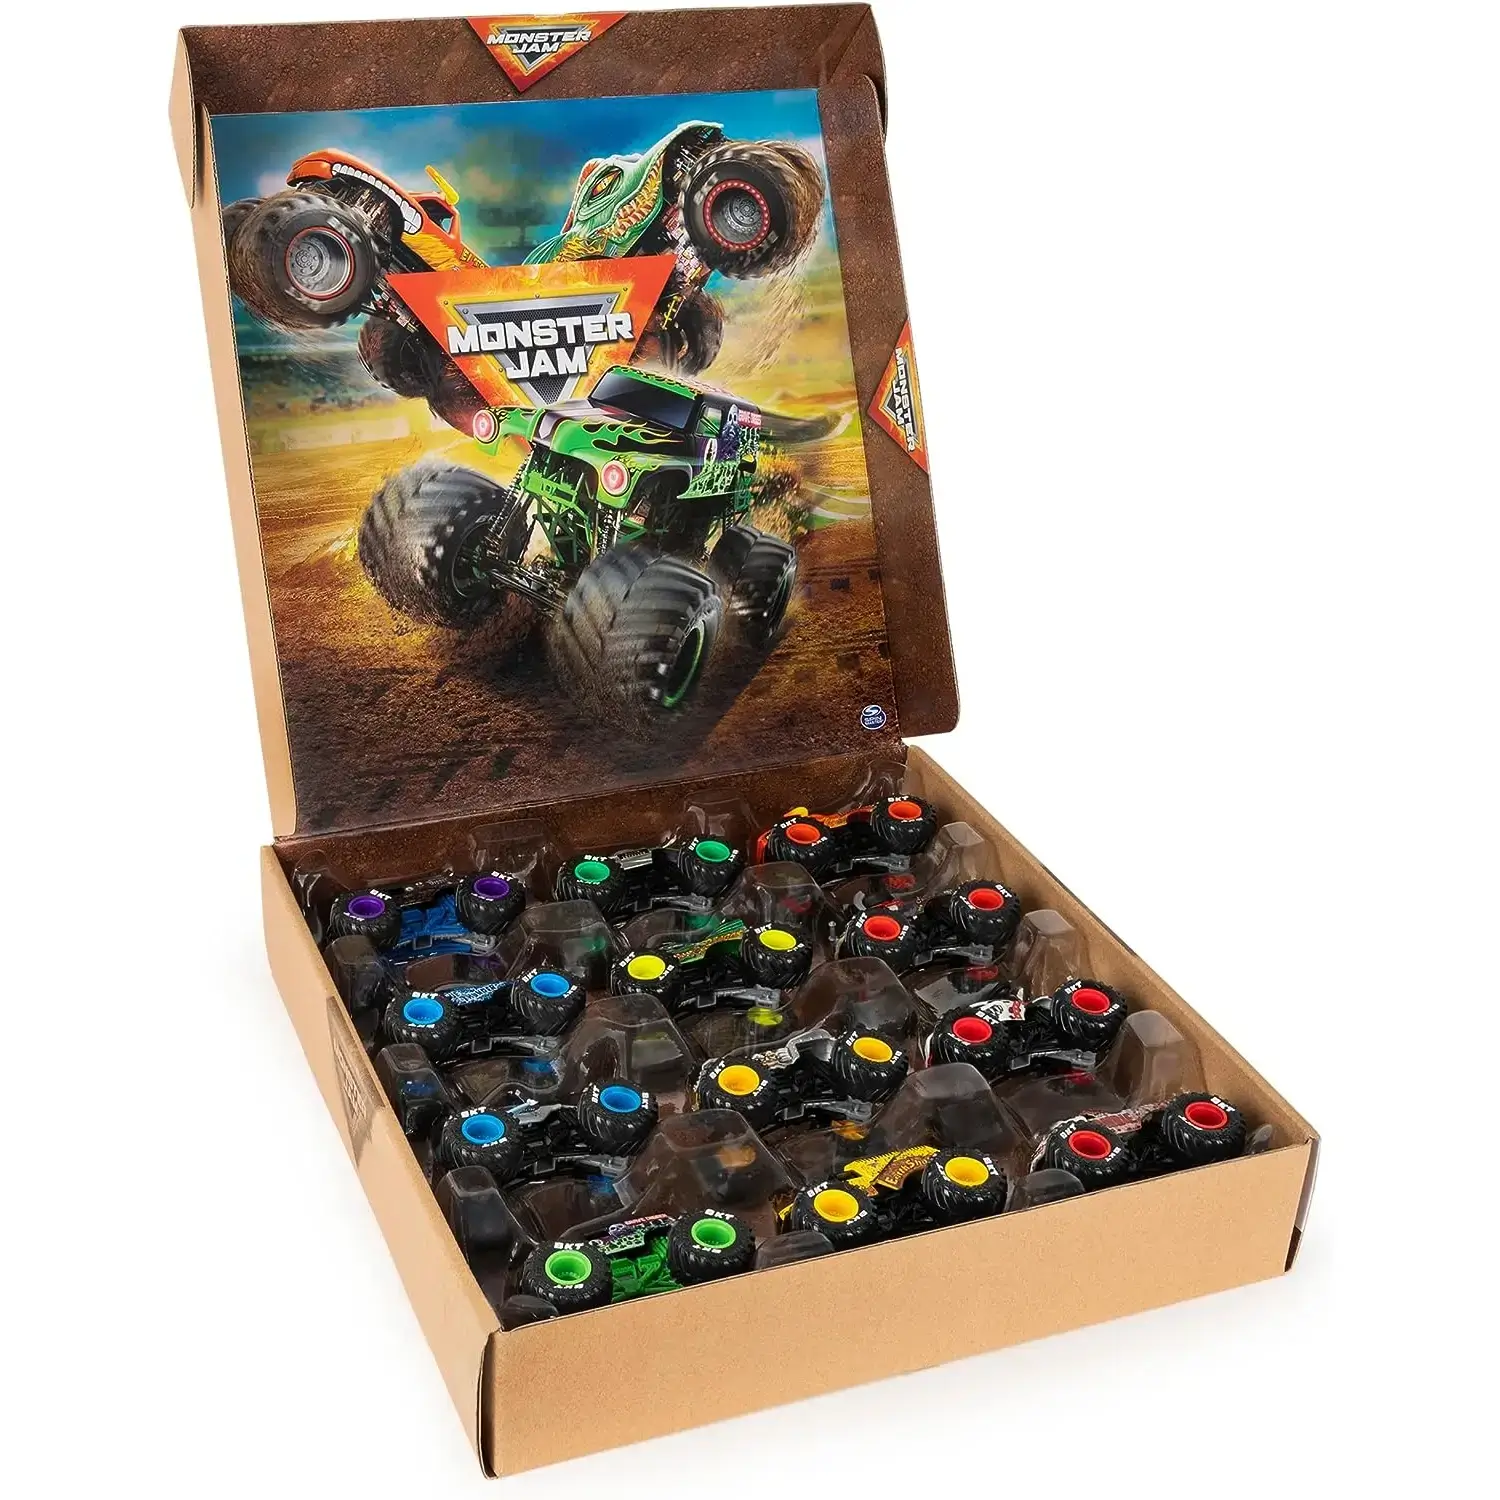 Official 12-Pack of 1:64 Scale Die-Cast Monster Trucks Image